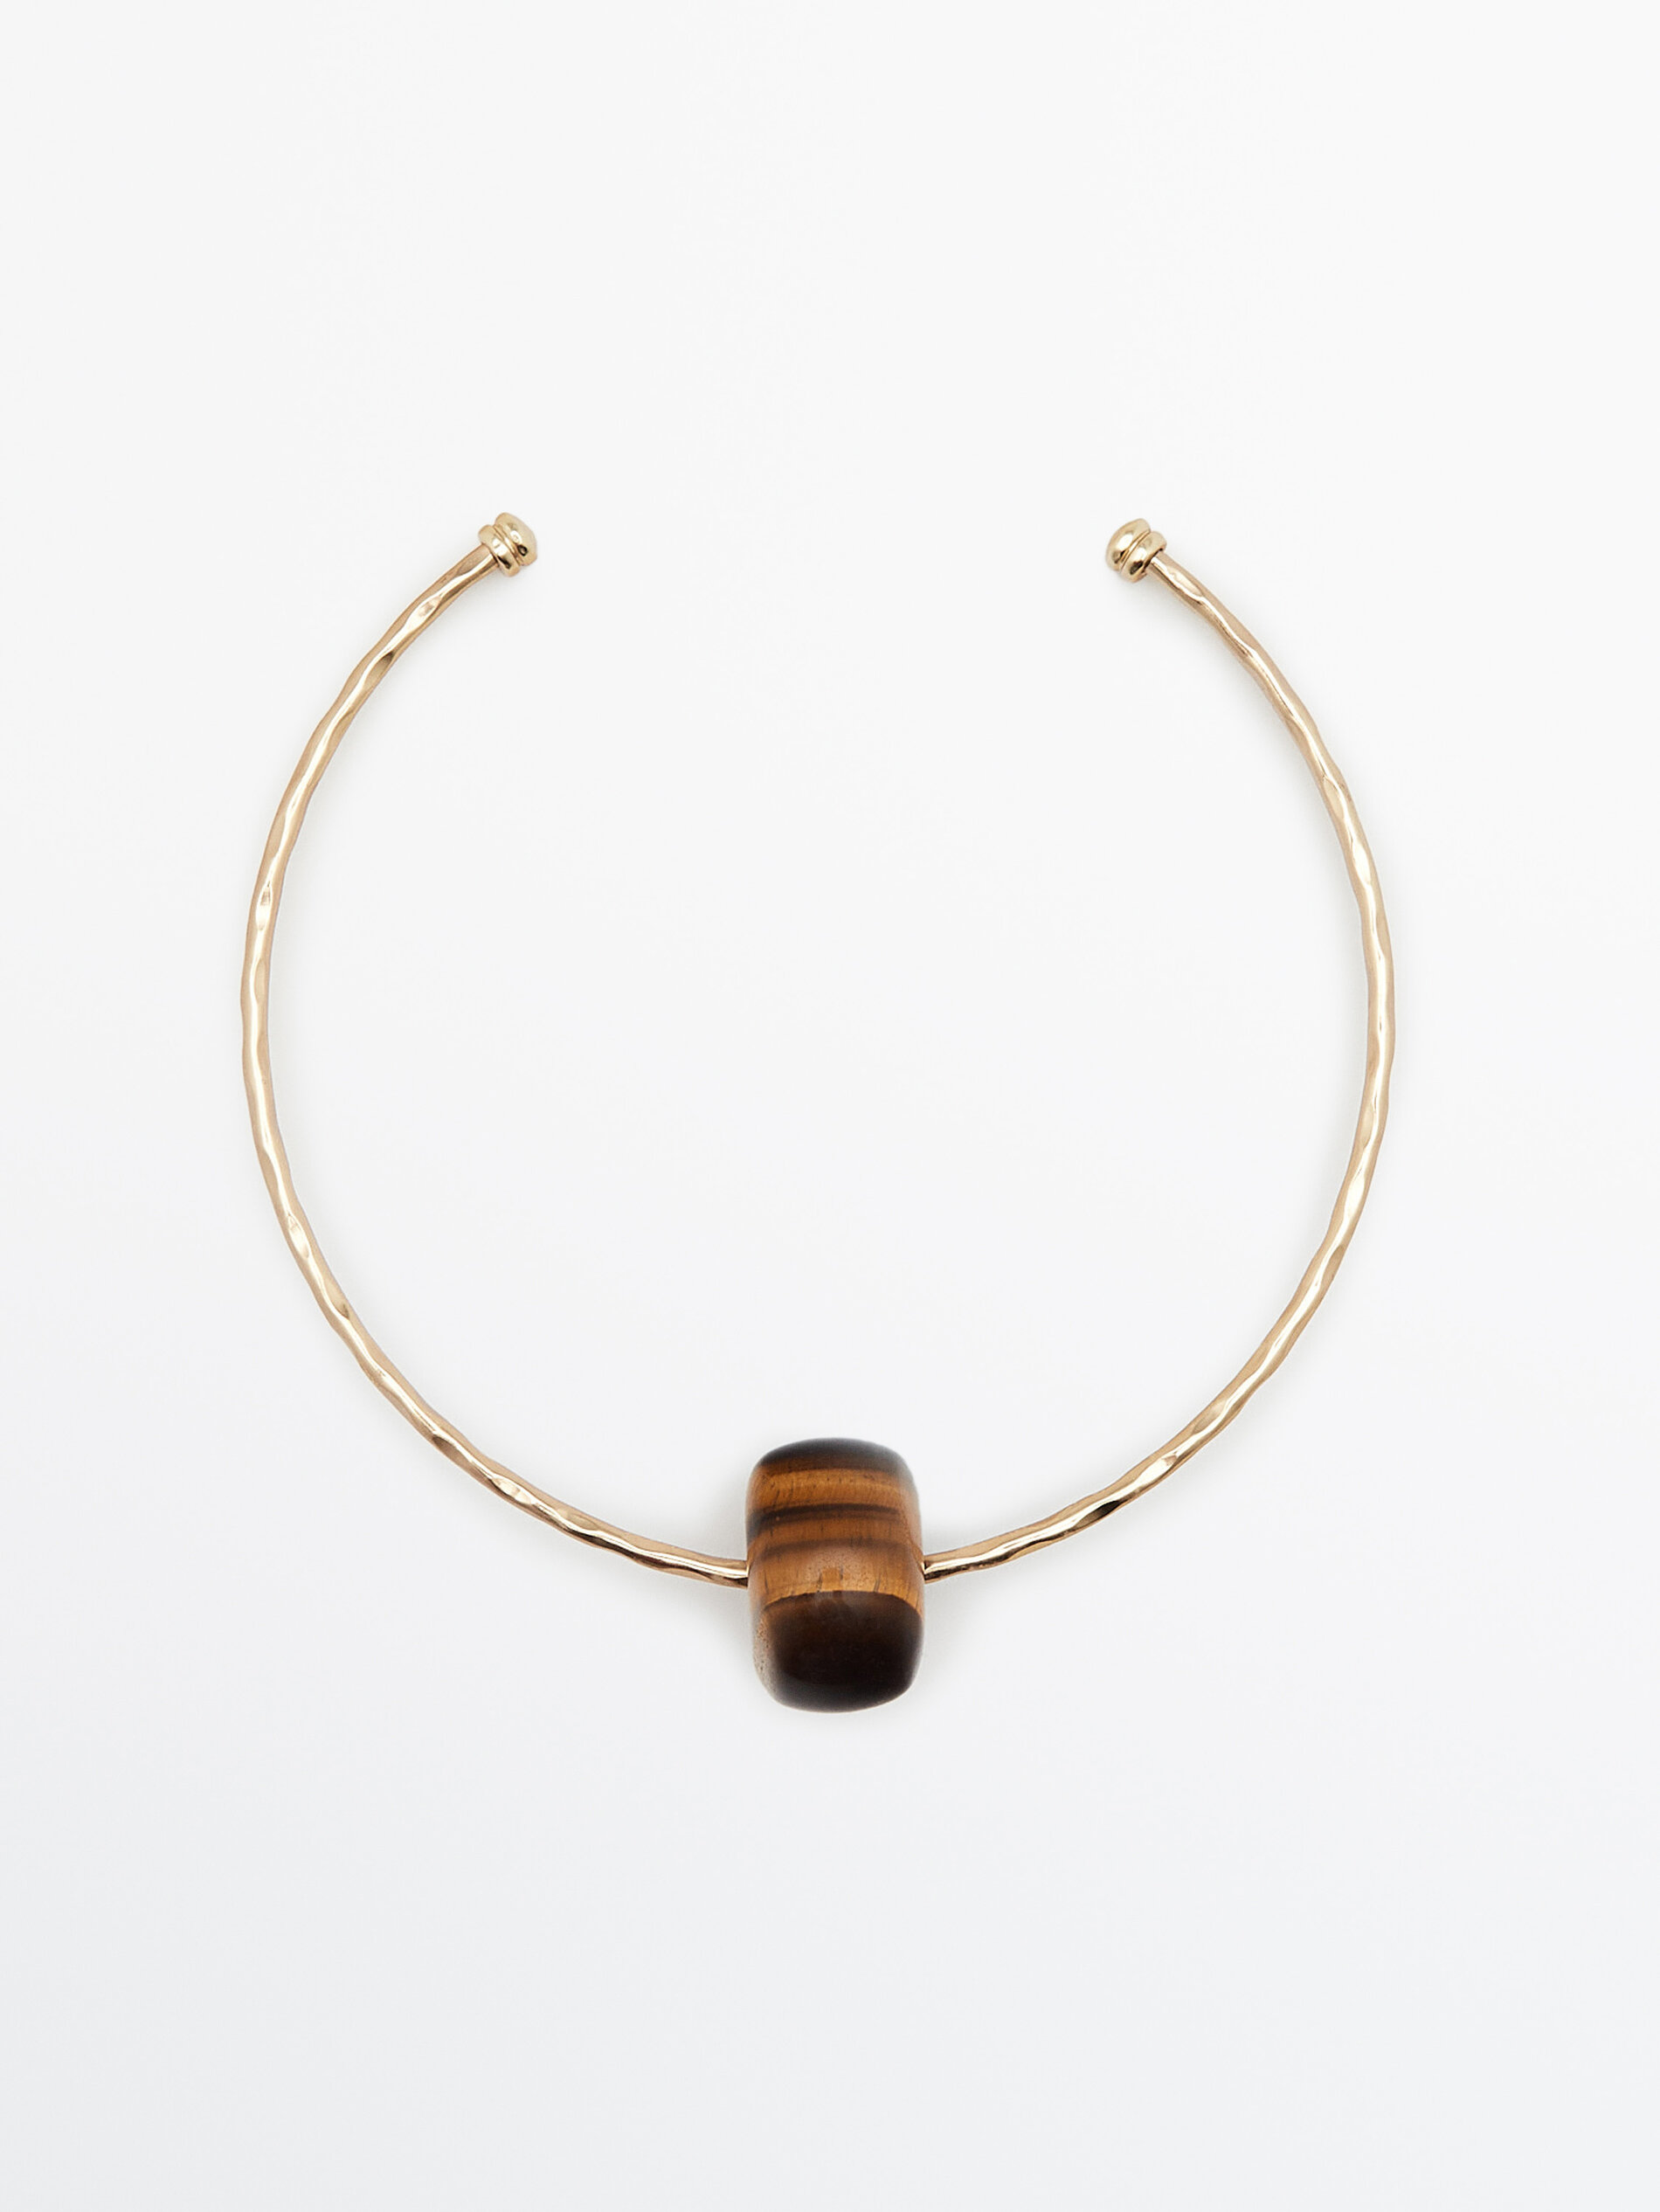 GOLD-PLATED TEXTURED CHOKER NECKLACE WITH BROWN STONE